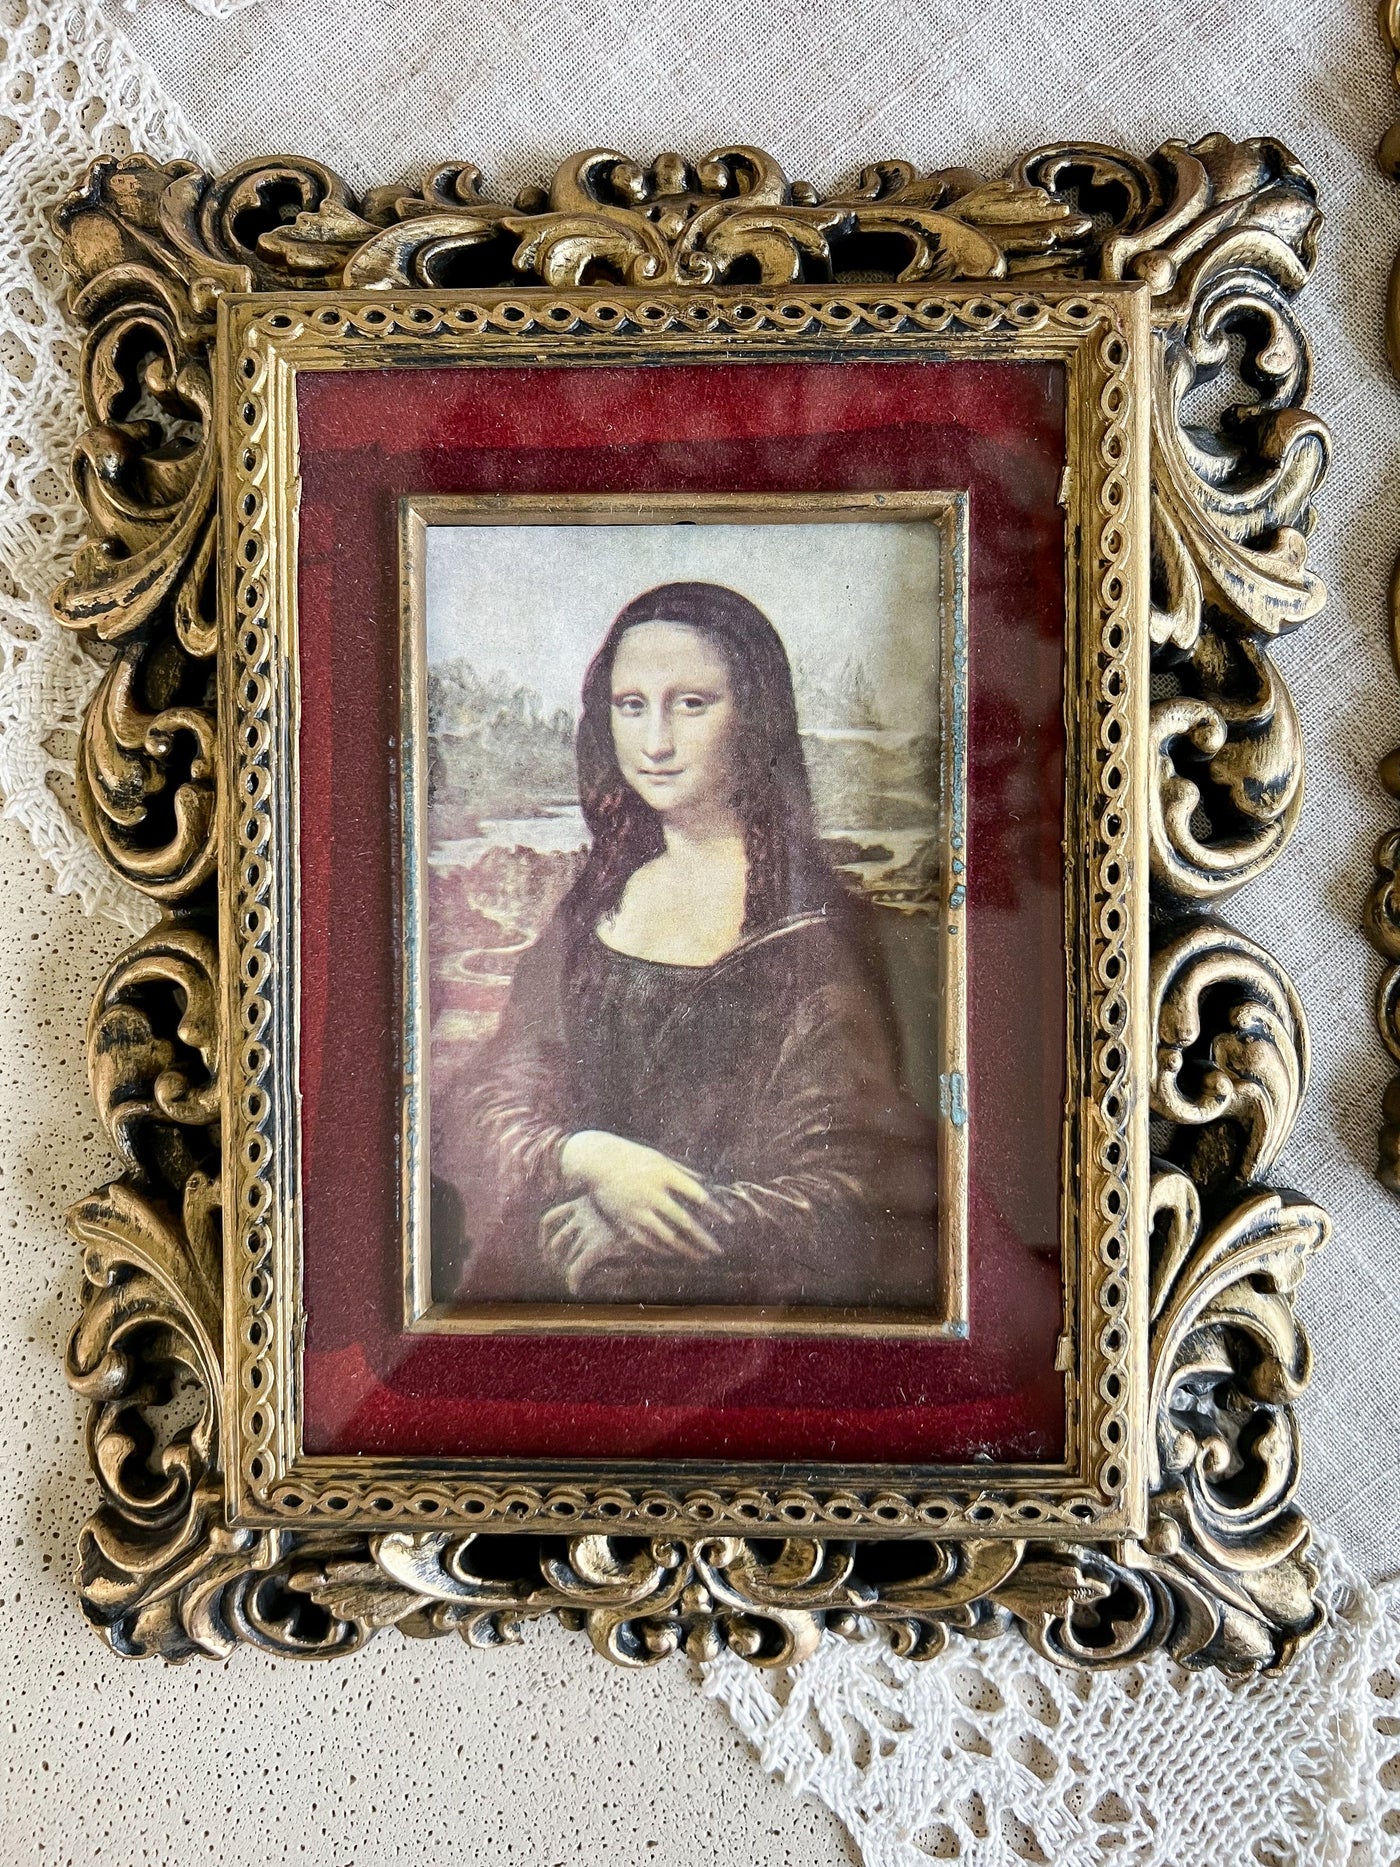 Vintage Gilded Mona Lisa & Blue Boy Framed Pictures Set with Red Velvet Matte Revive In Style Vintage Furniture Painted Refinished Redesign Beautiful One of a Kind Artistic Antique Unique Home Decor Interior Design French Country Shabby Chic Cottage Farmhouse Grandmillenial Coastal Chalk Paint Metallic Glam Eclectic Quality Dovetailed Rustic Furniture Painter Pinterest Bedroom Living Room Entryway Kitchen Home Trends House Styles Decorating ideas